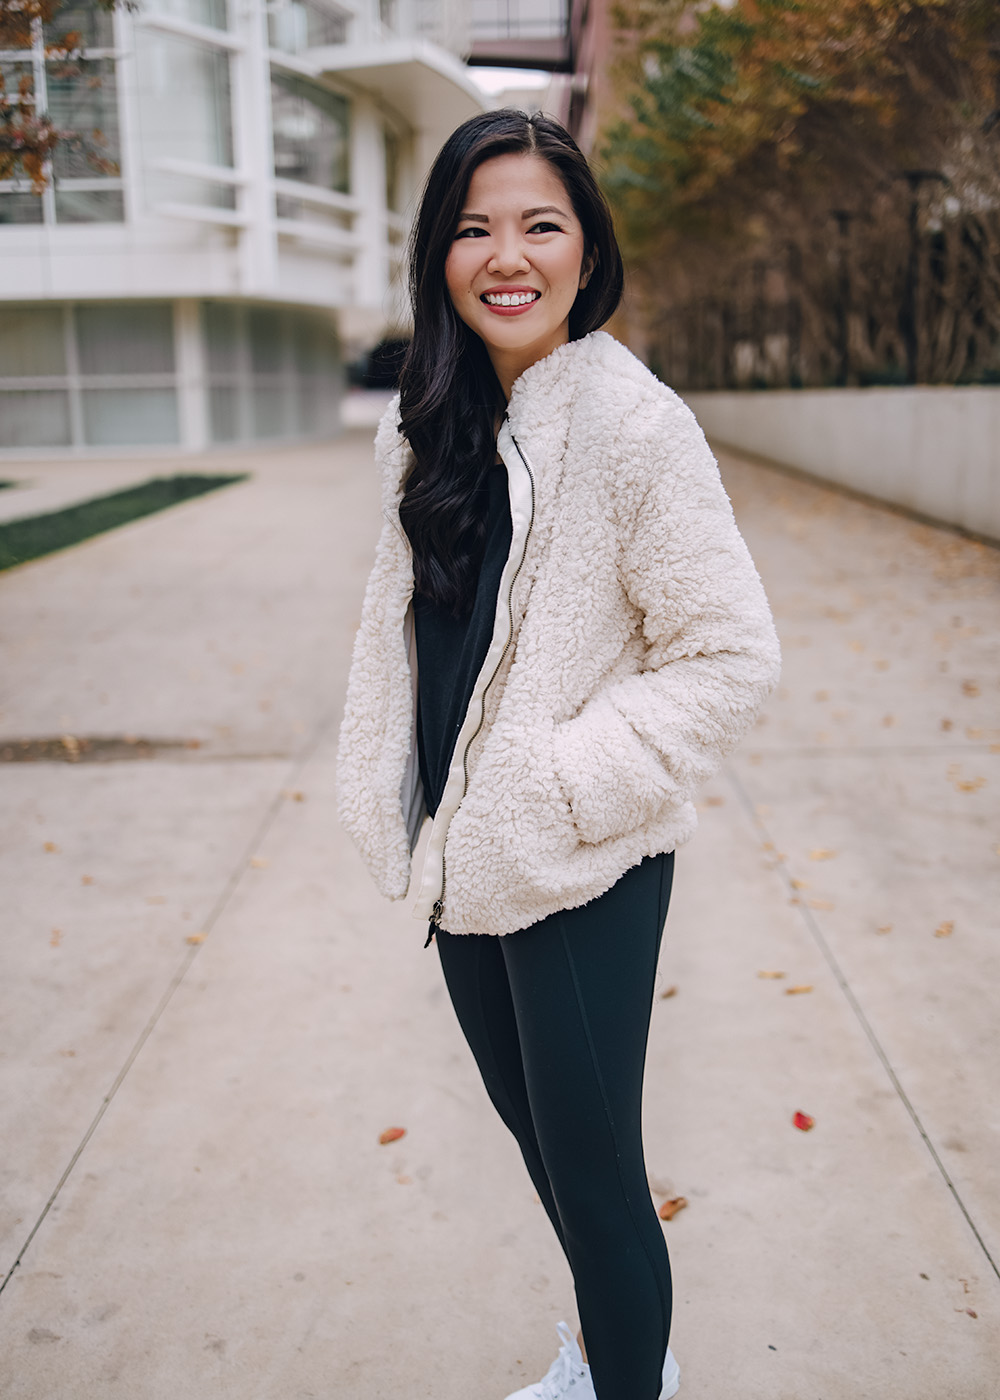 This Cozy Sherpa Jacket Is on Sale Right Now